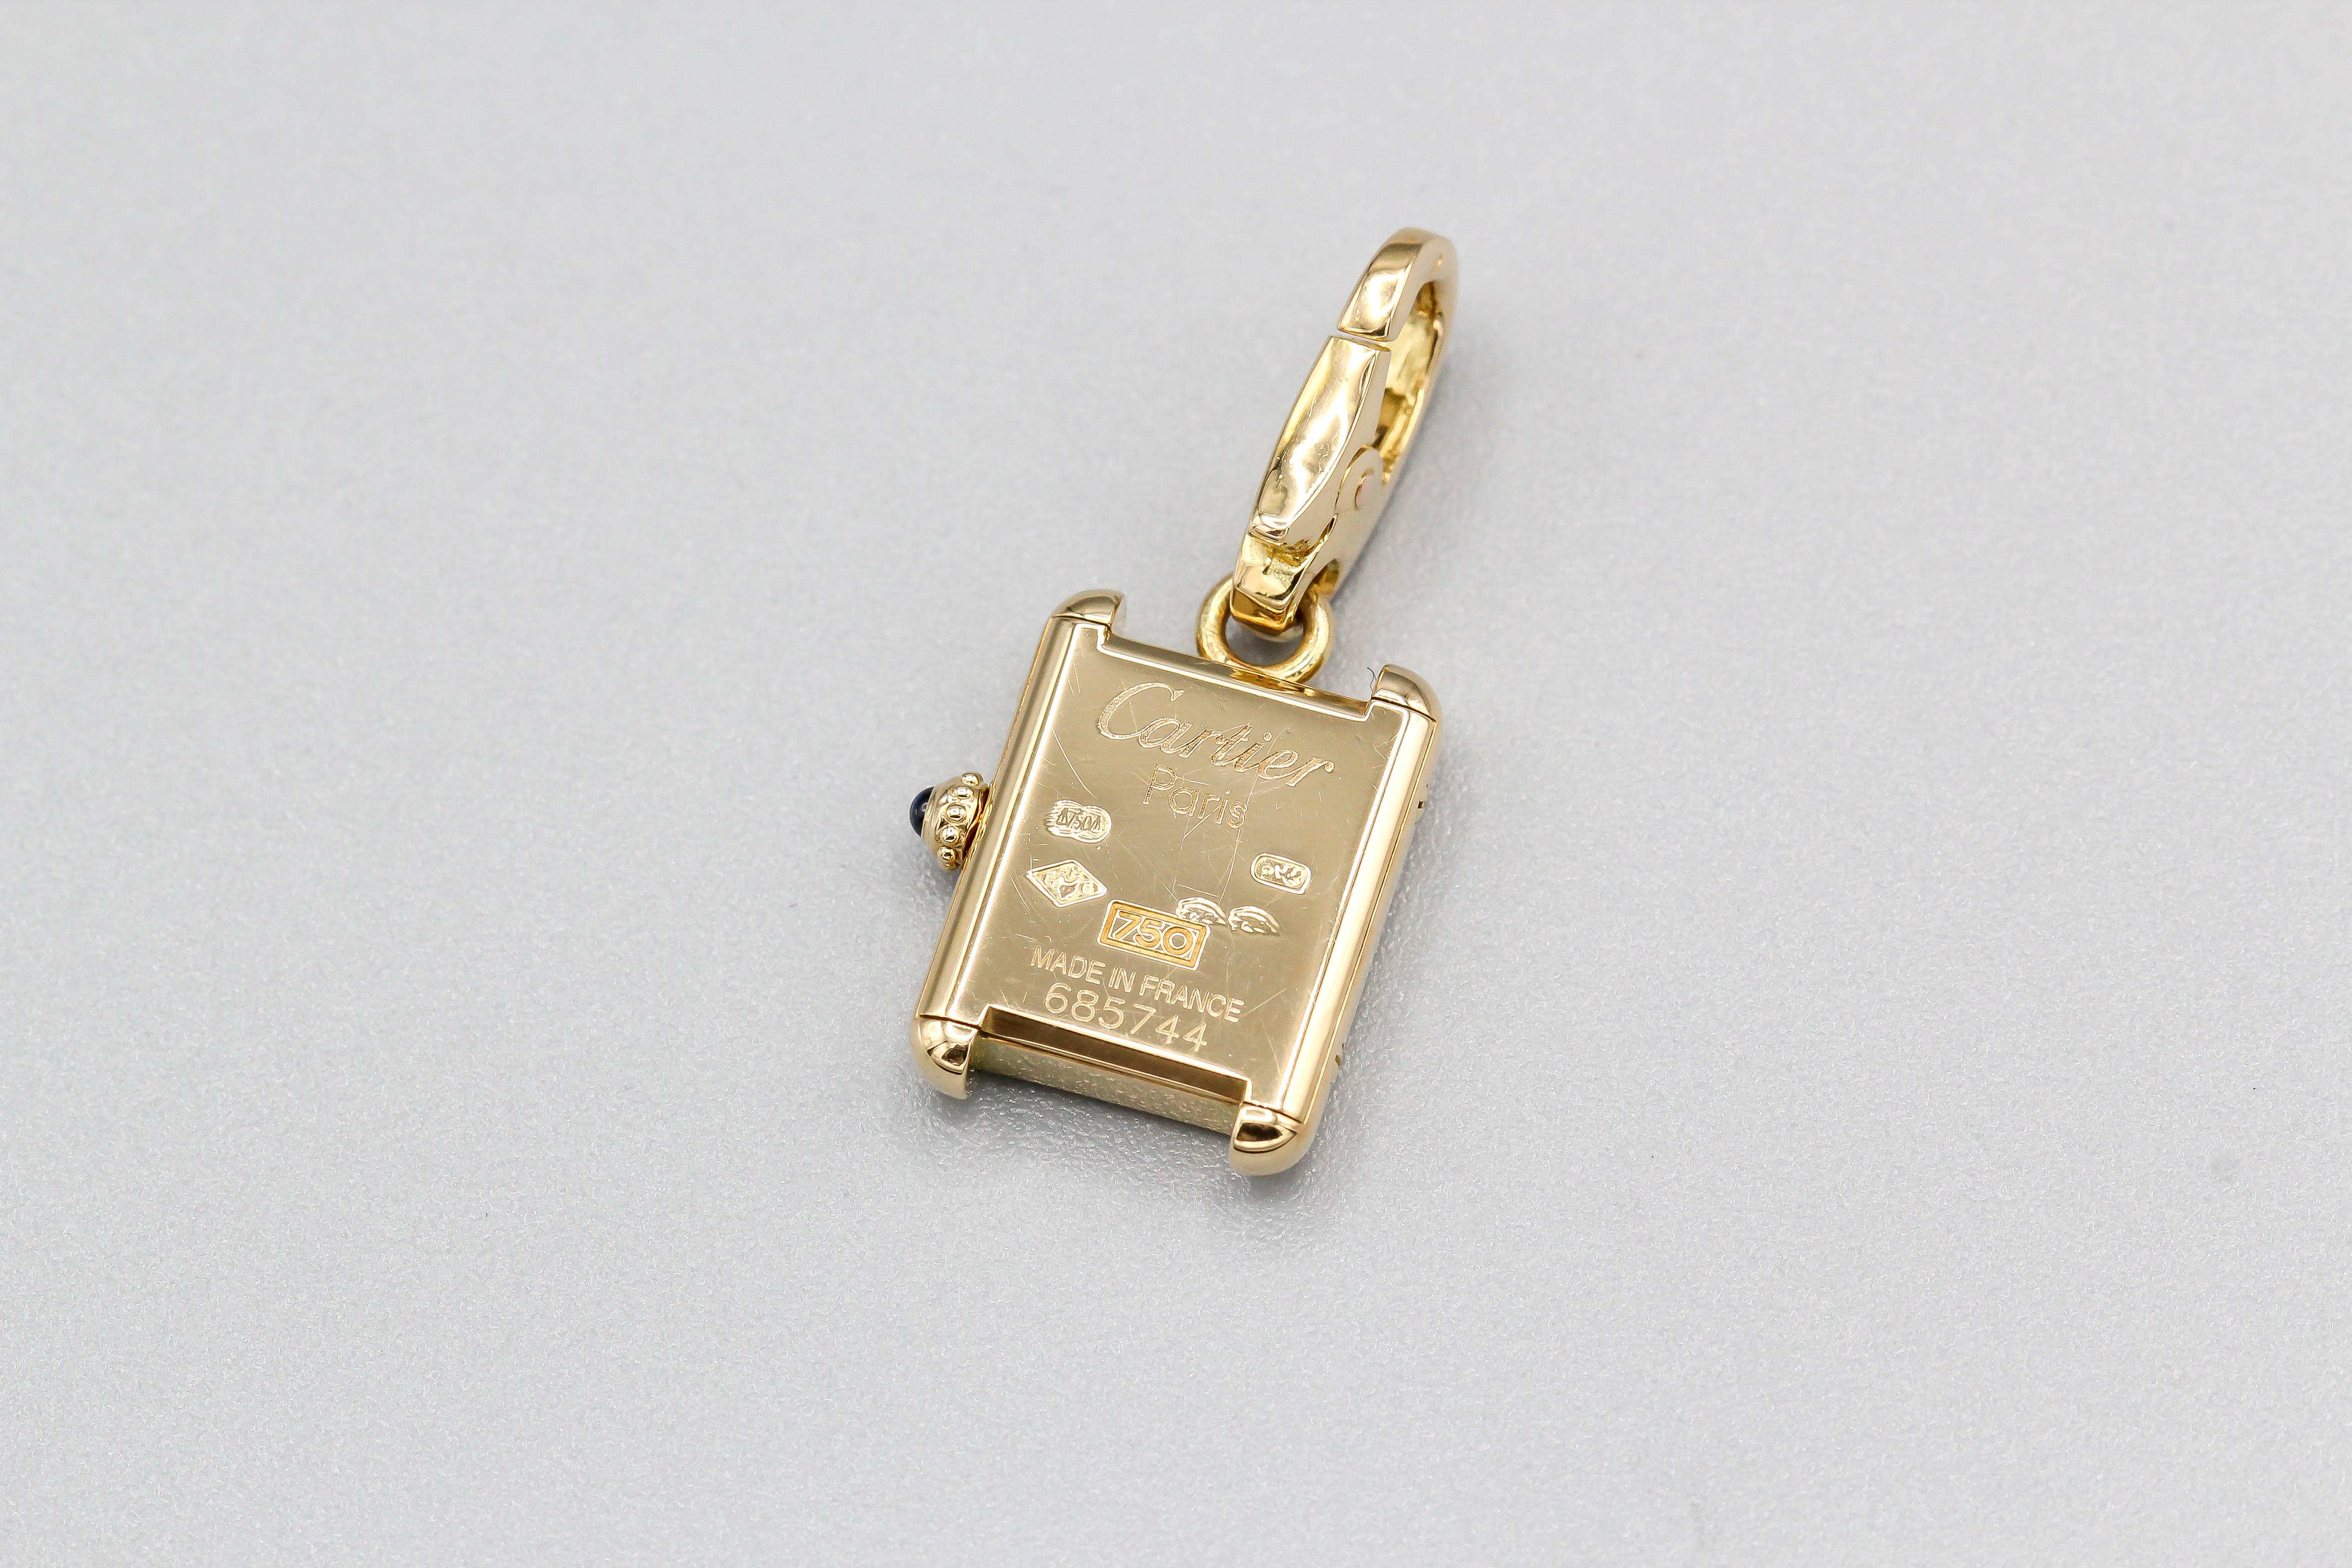 Fine and rare 18k yellow gold Louis Cartier watch charm by Cartier.

Hallmarks: Cartier Paris, 750, reference numbers, French 18k gold assay marks, maker's mark, MADE IN FRANCE.